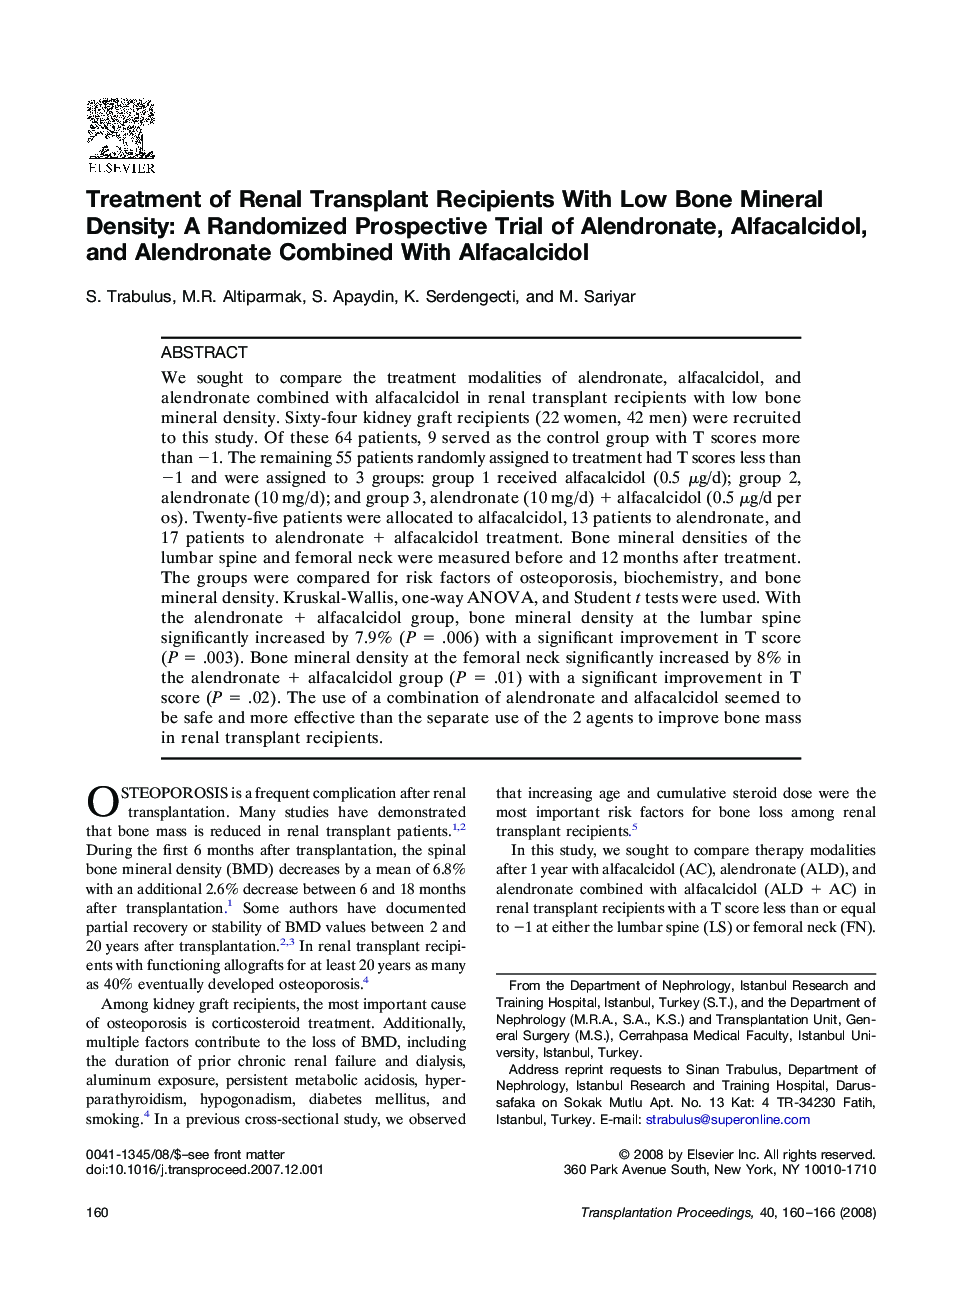 Treatment of Renal Transplant Recipients With Low Bone Mineral Density: A Randomized Prospective Trial of Alendronate, Alfacalcidol, and Alendronate Combined With Alfacalcidol